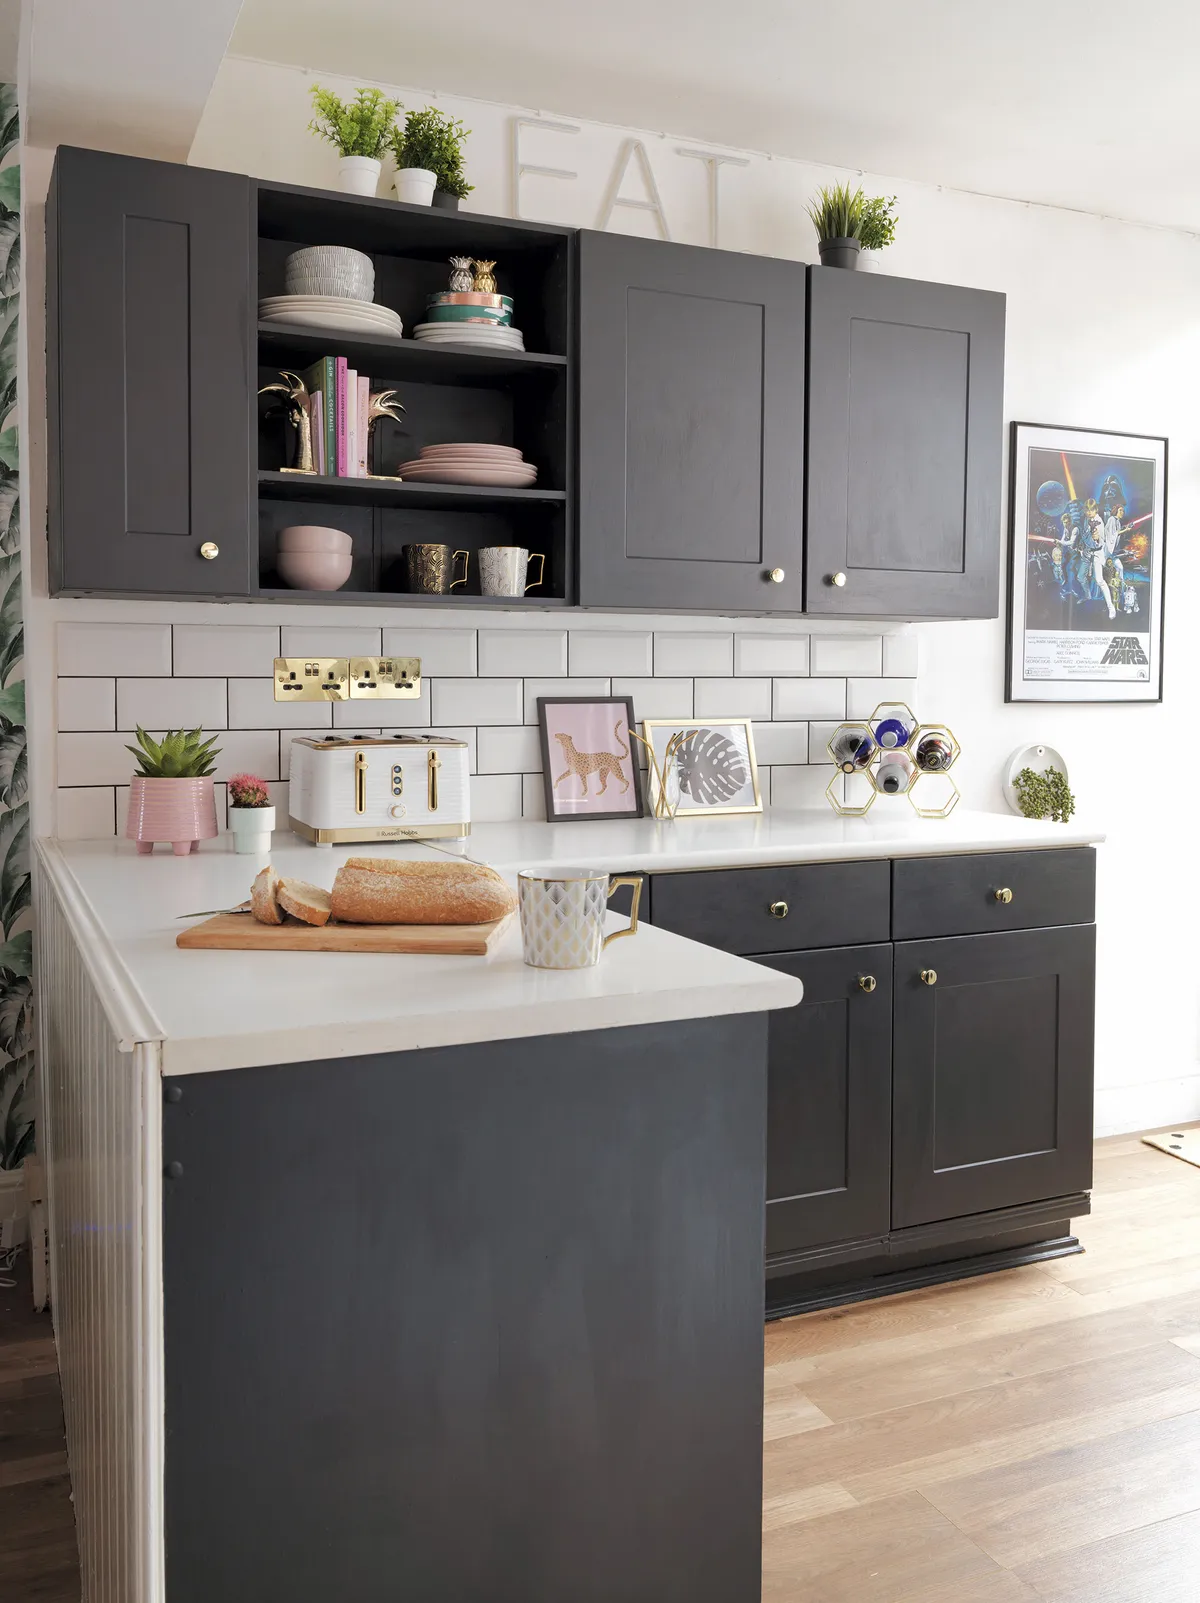 Black painted cabinets in the kitchen have been given a more feminine flourish with pale pink crockery and accessories. The Star Wars print was Aaron’s choice – ‘it’s quite possibly his favourite part of the house,’ laughs Raya